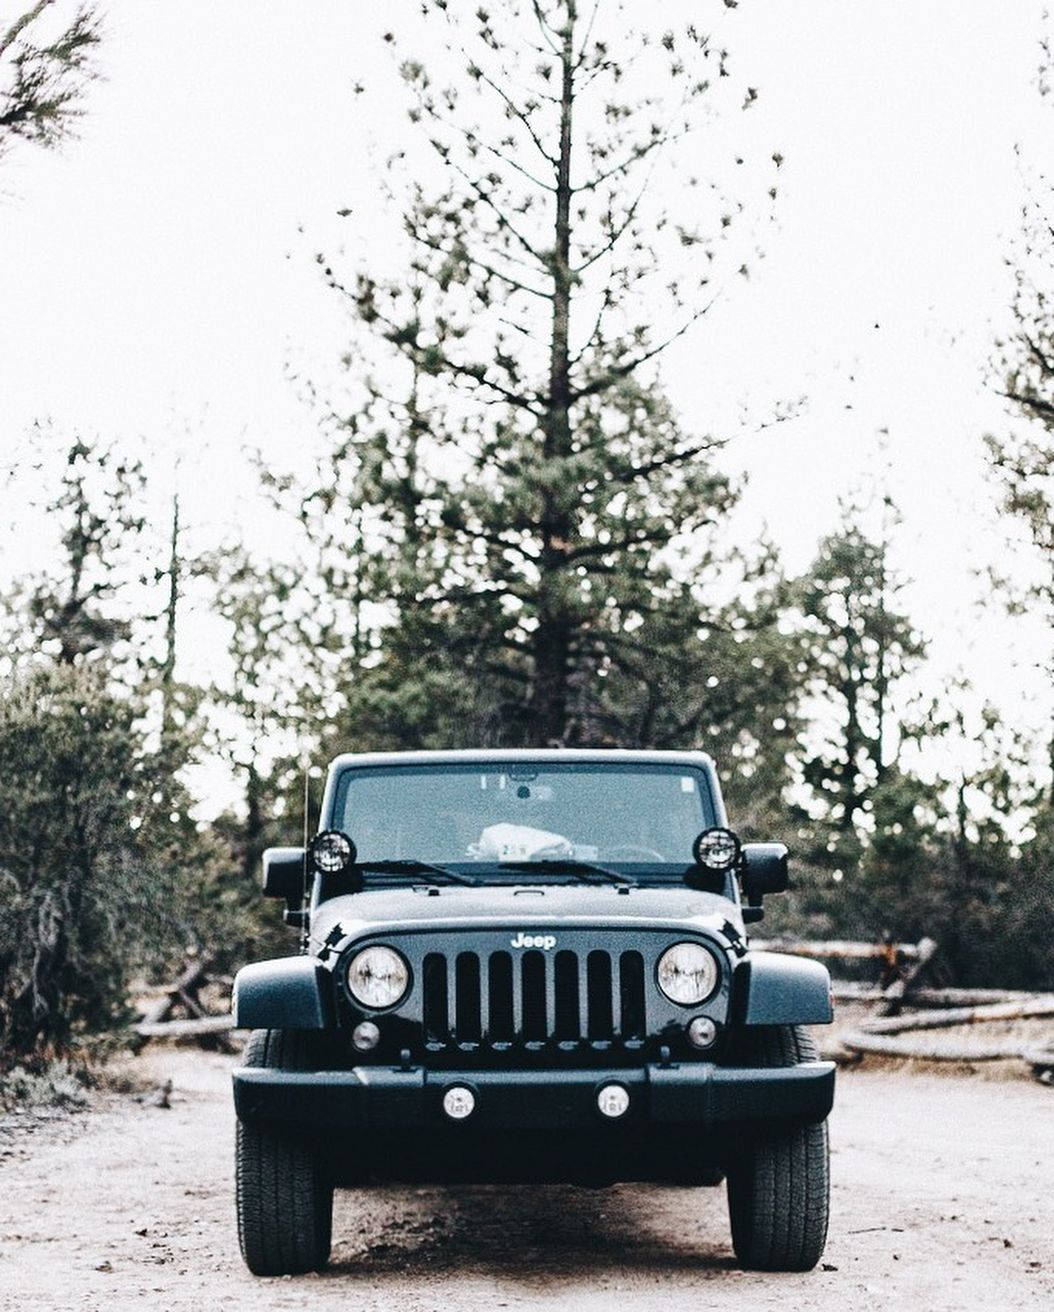 Black Jeep Wrangler With Tall Trees